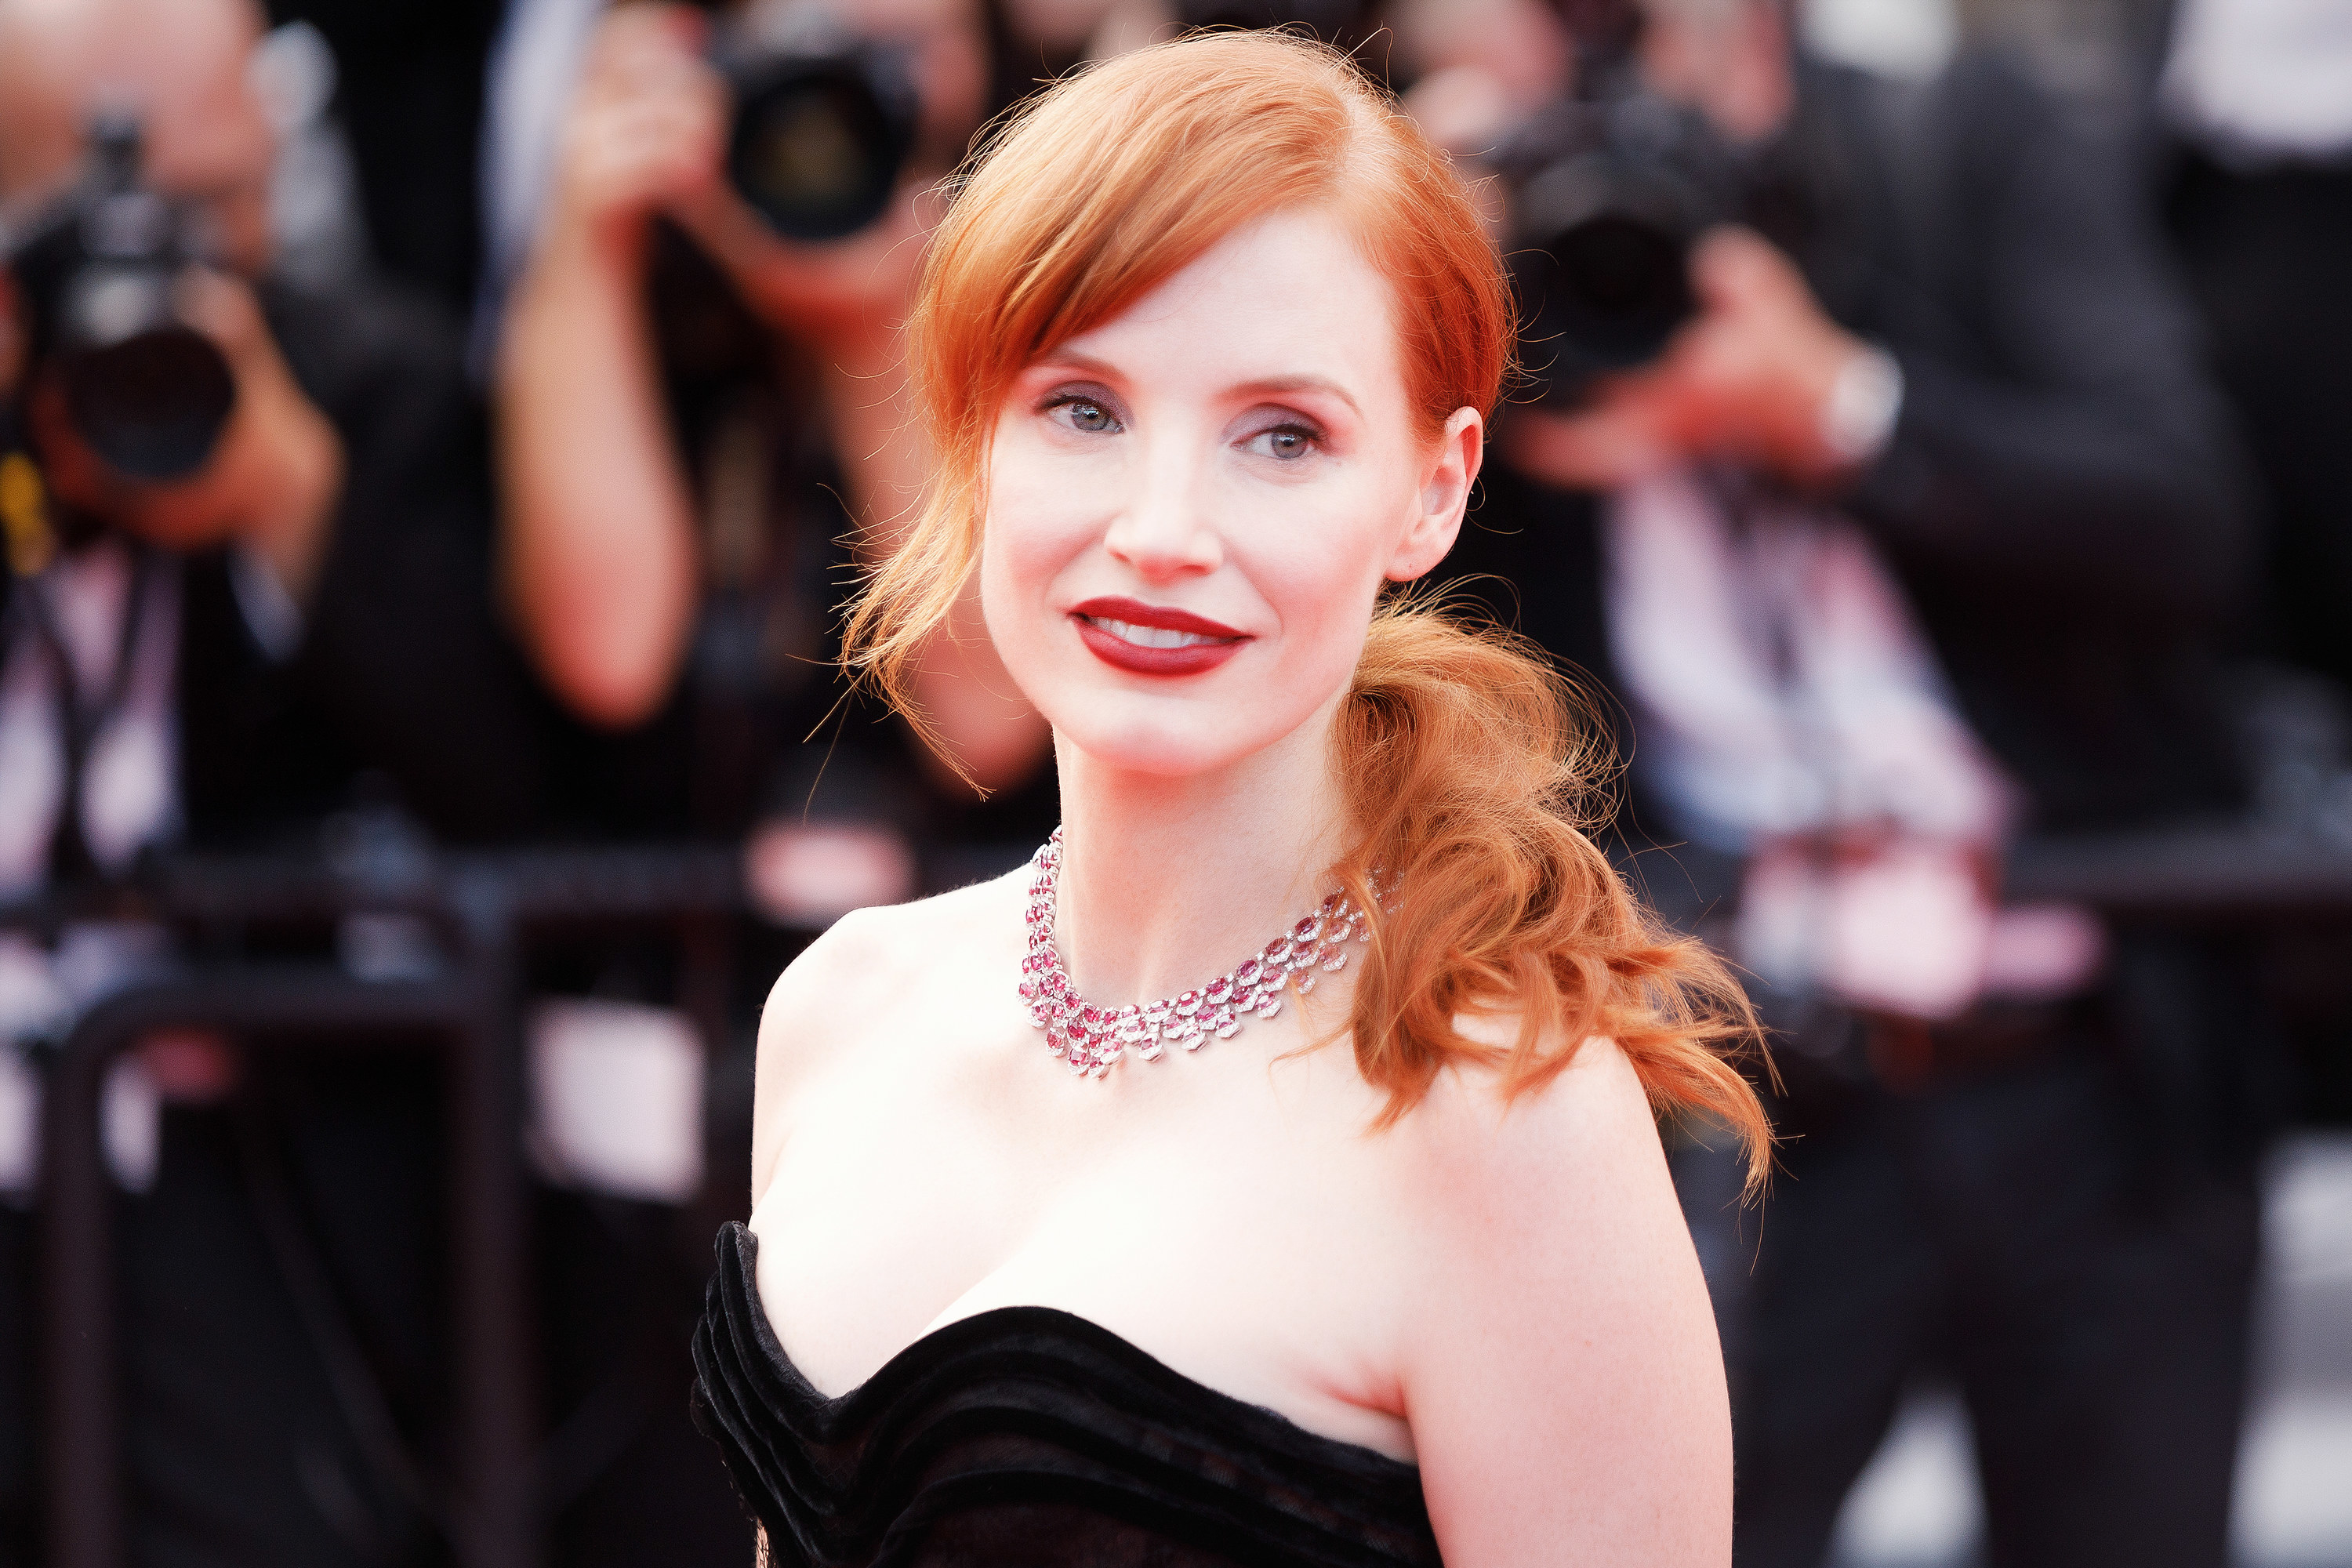 Jessica Chastain at the Cannes Film Festival in 2021